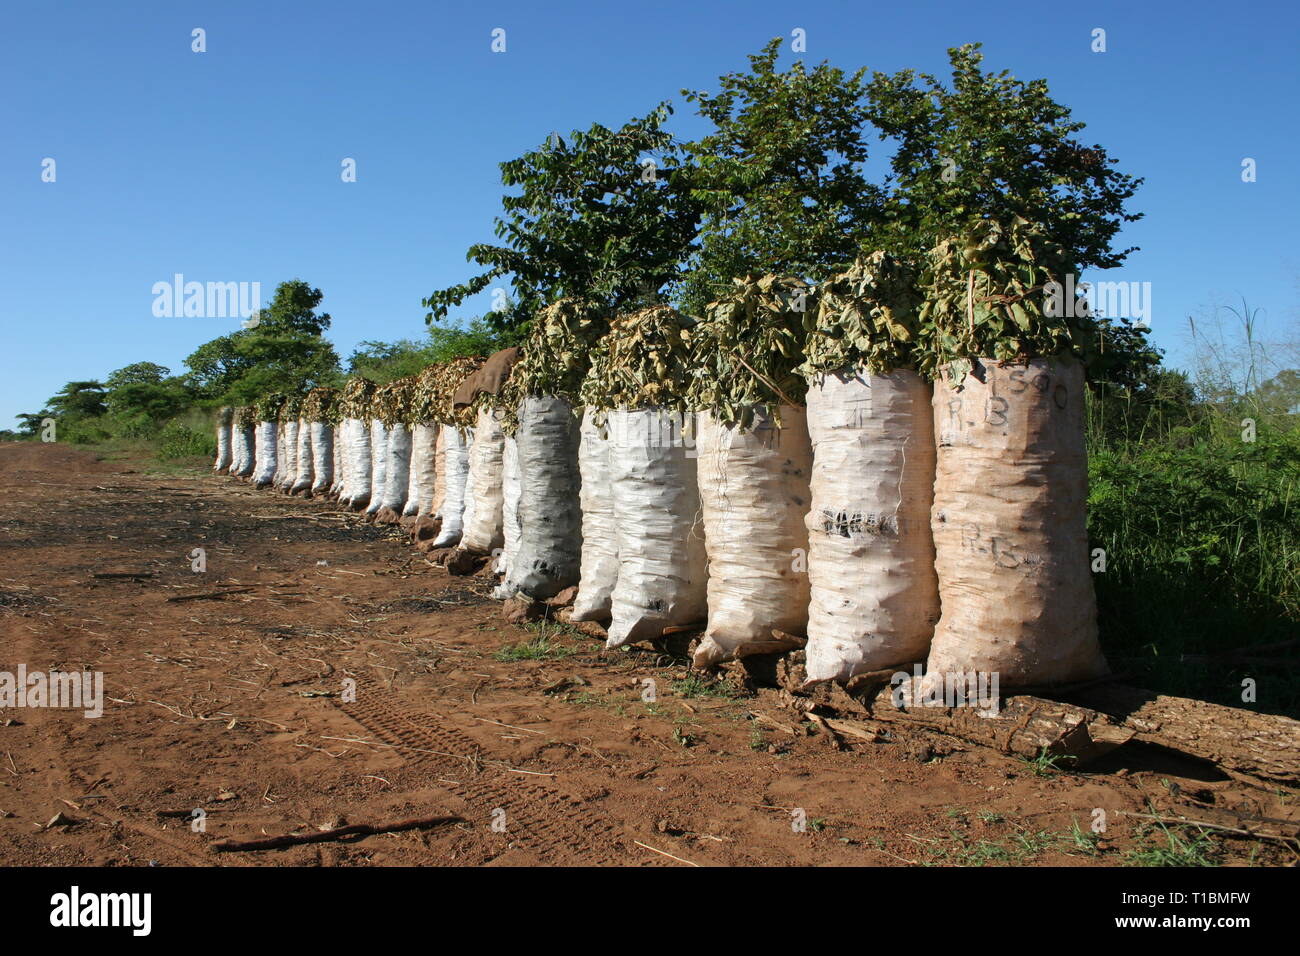 Sacks of charcoal for sale are lined up in a row by the roadside in Masindi district, Uganda. Stock Photo